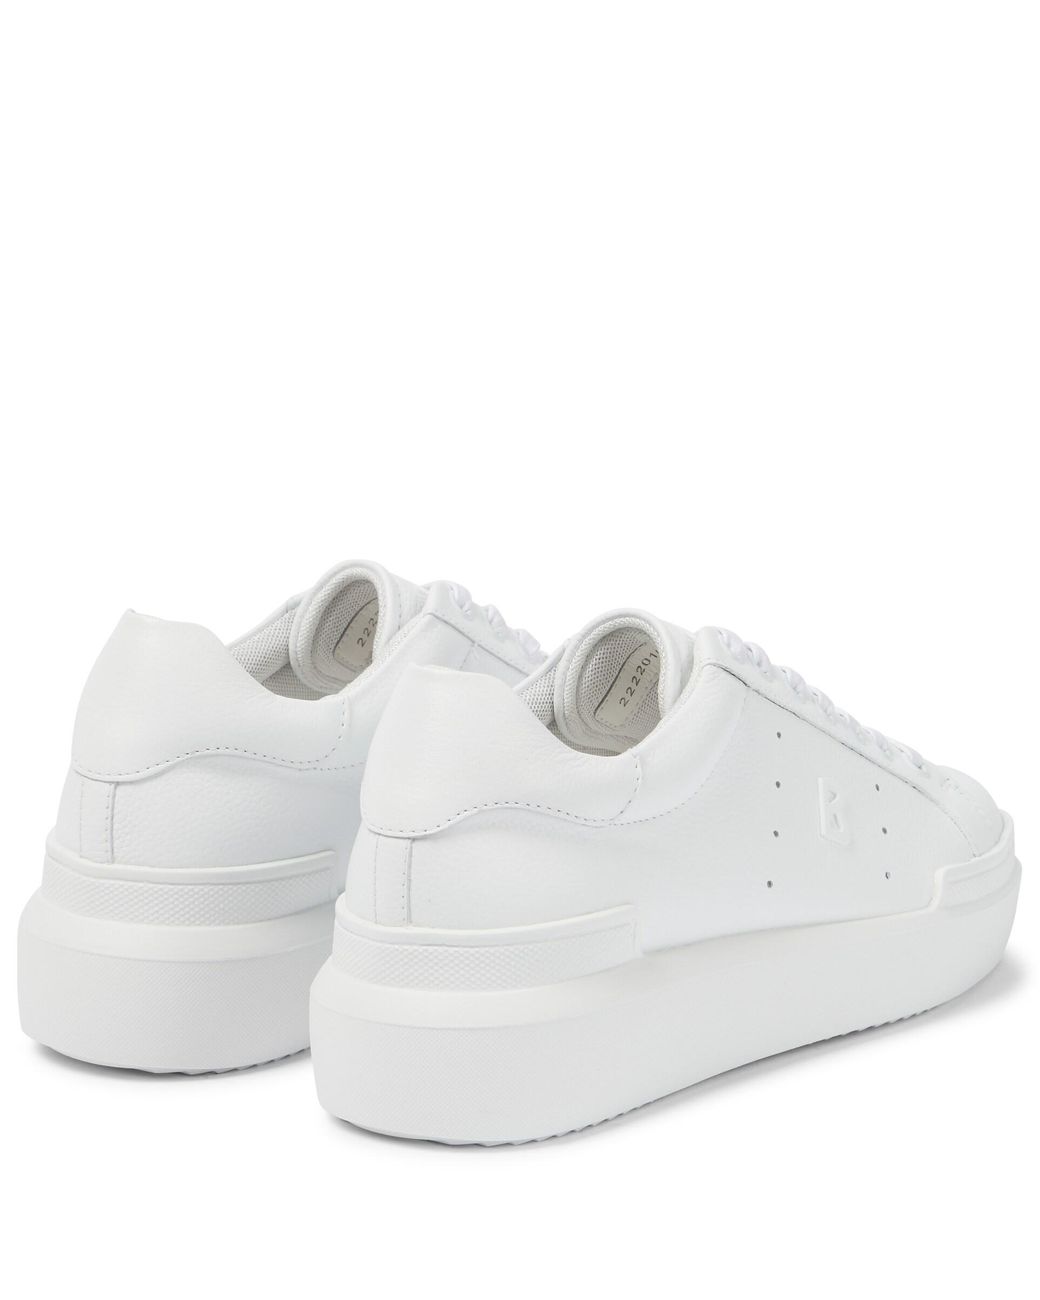 Bogner Hollywood Leather Sneakers in White | Lyst